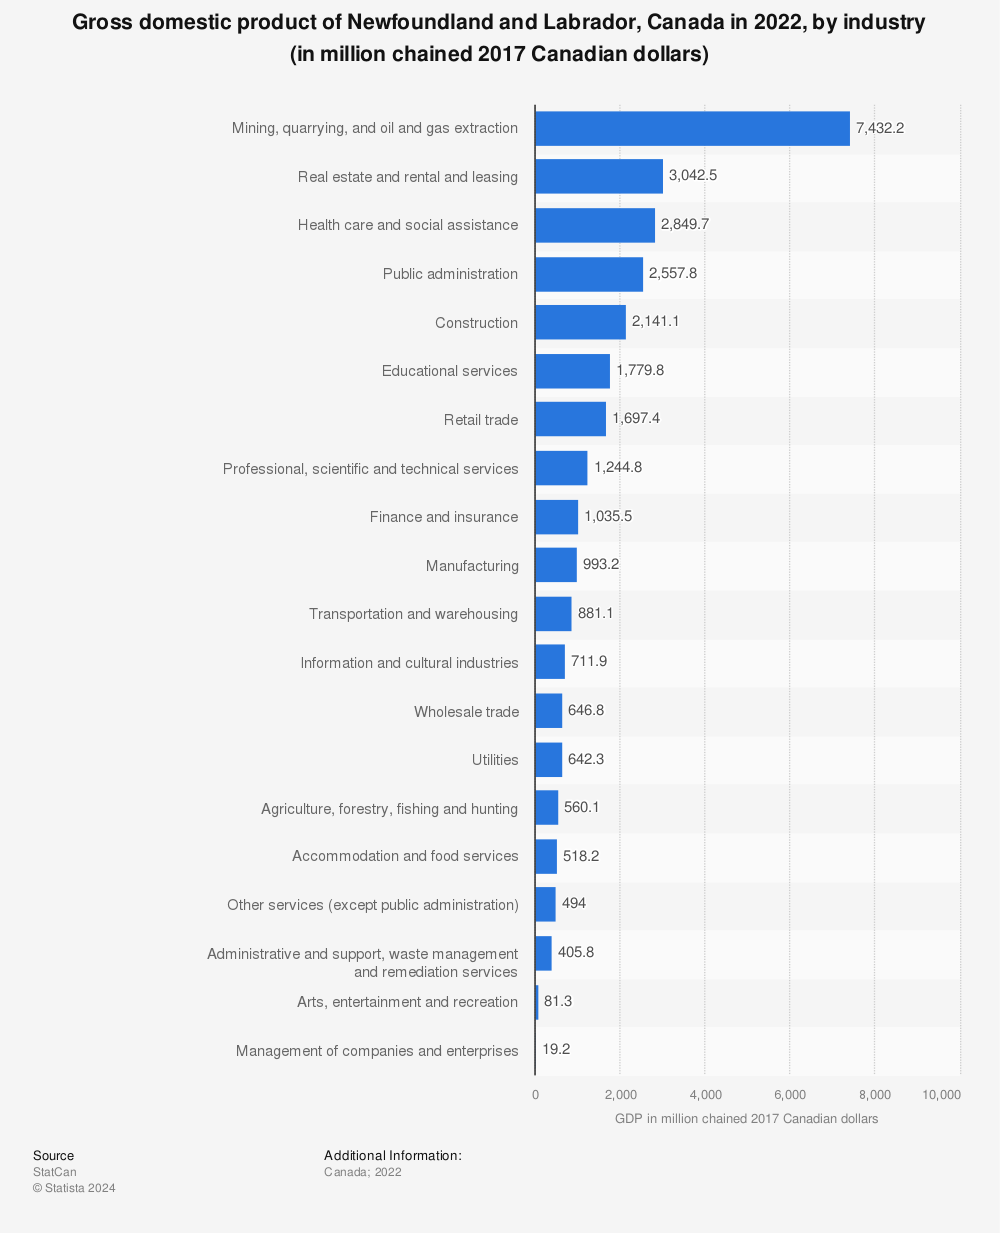 Statistic: Gross domestic product of Newfoundland and Labrador, Canada in 2020, by industry (in million chained 2012 Canadian dollars) | Statista